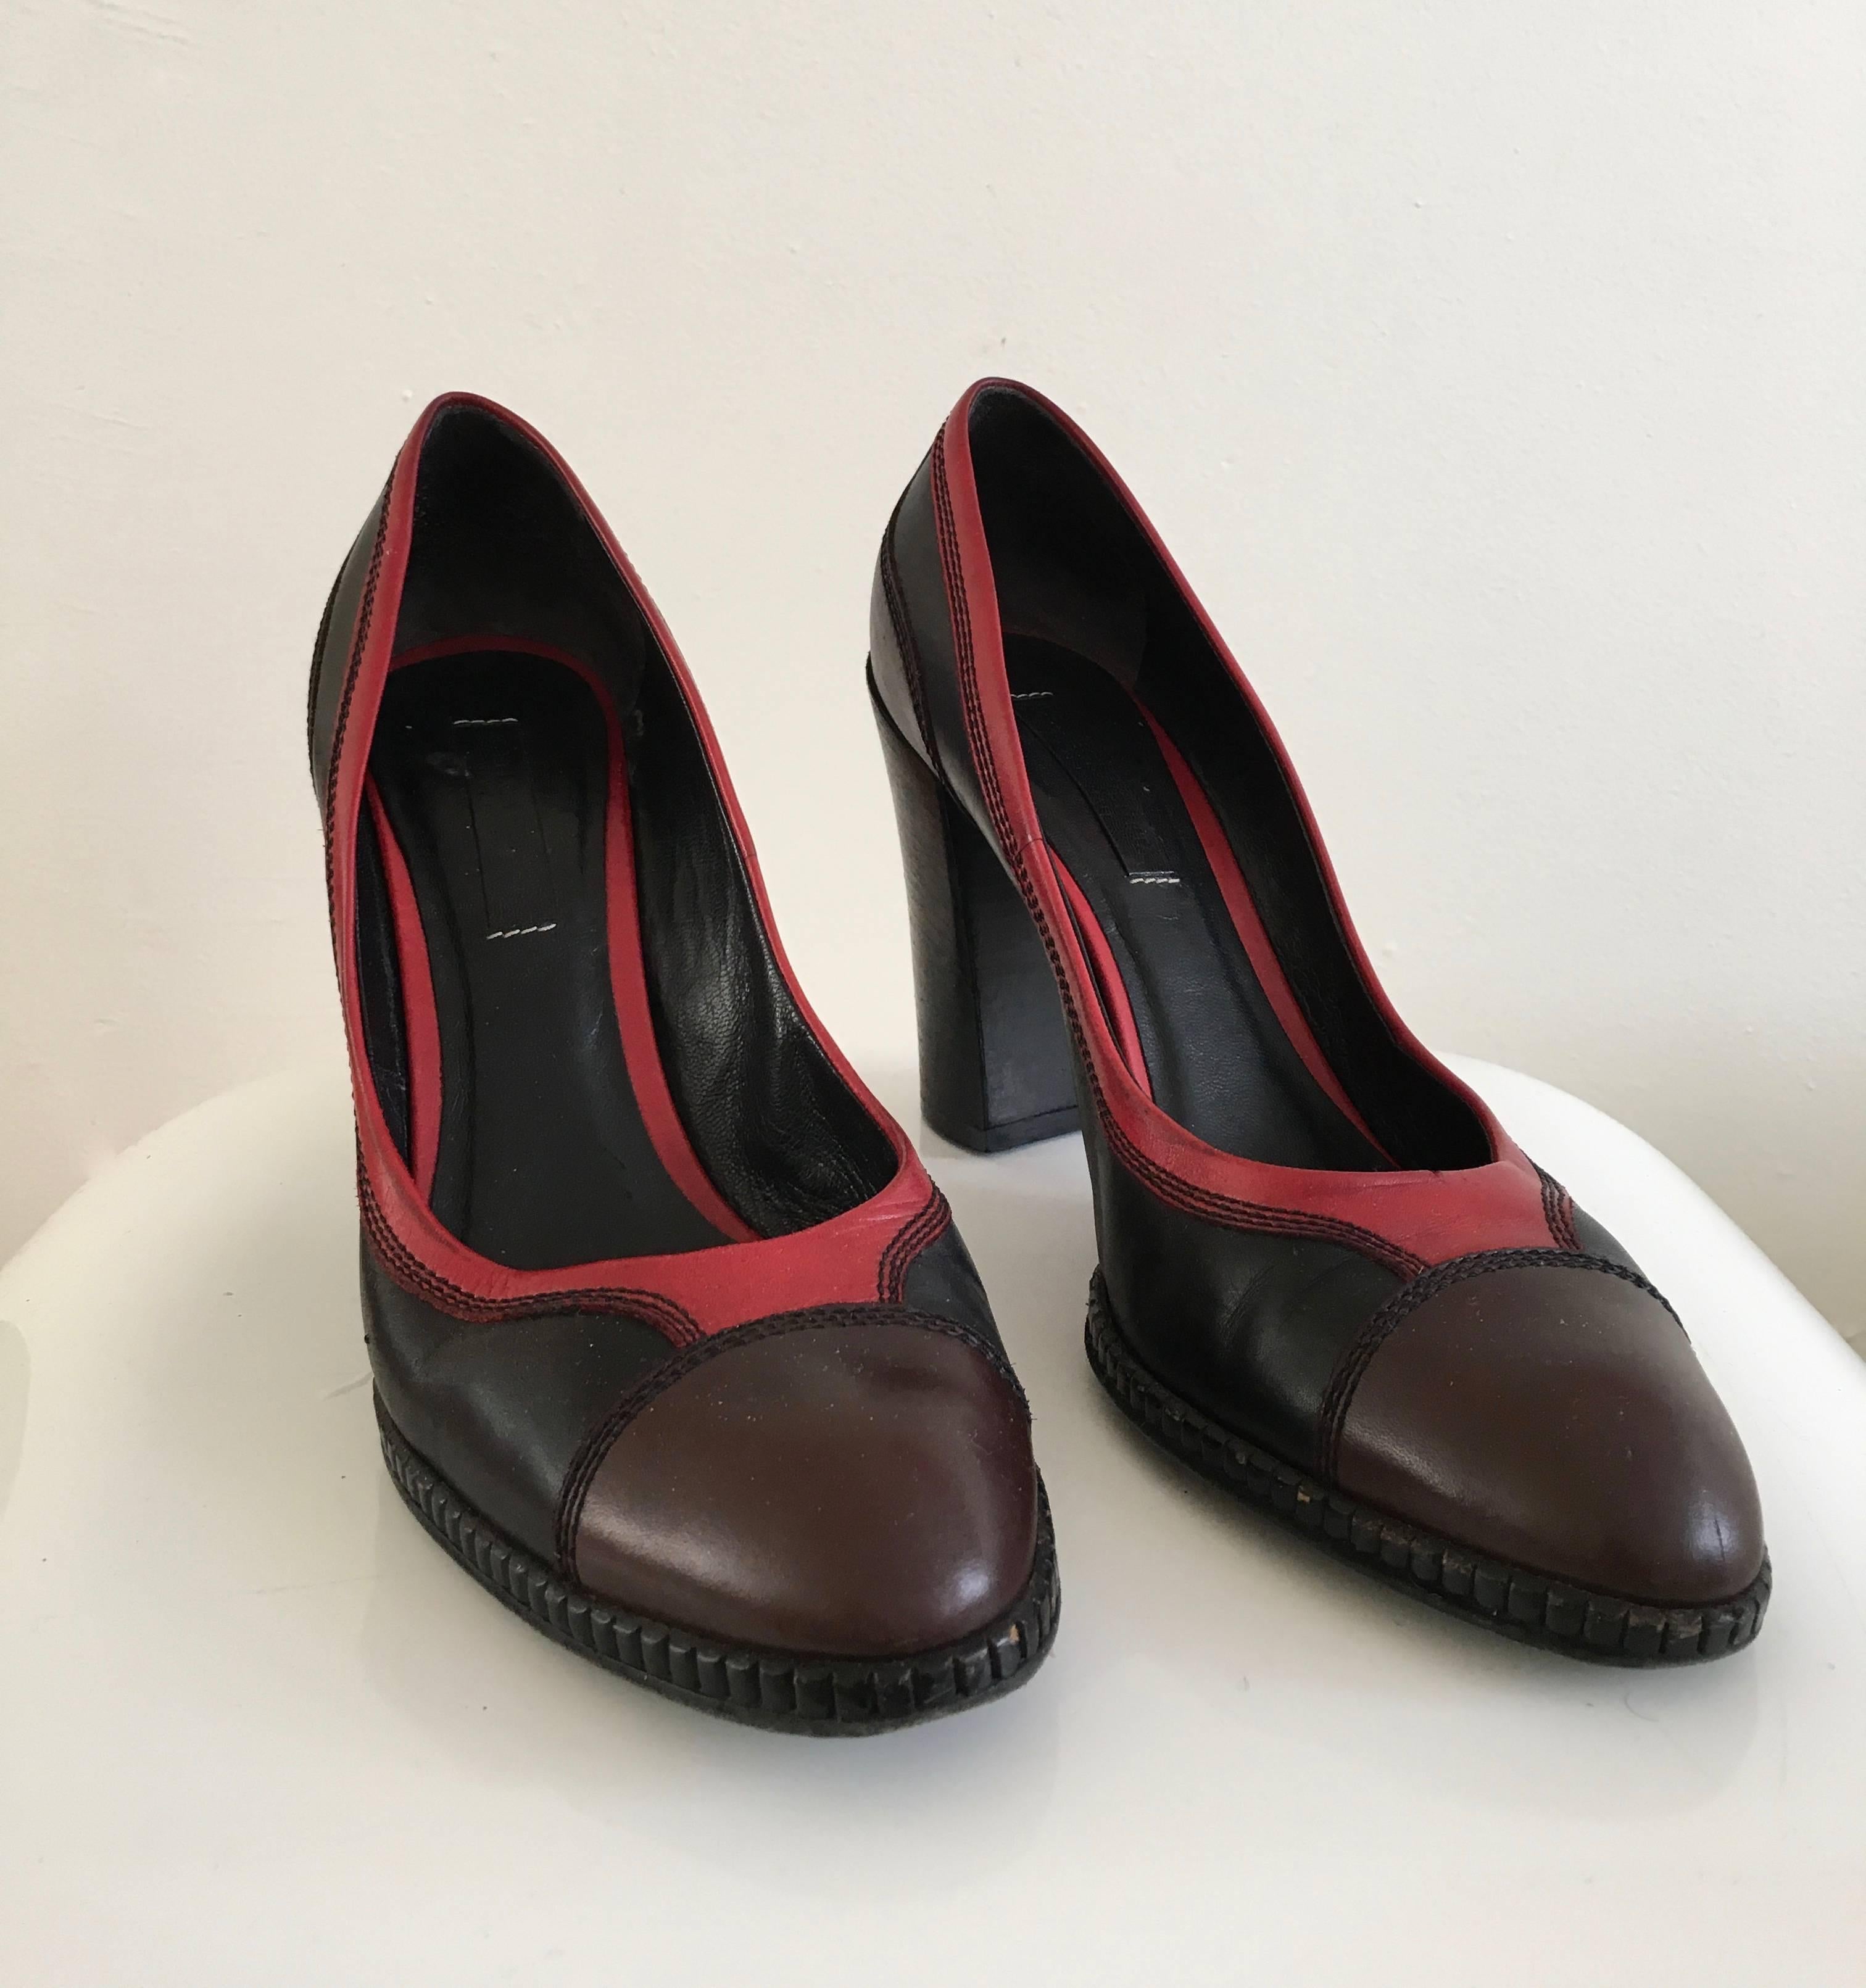 Bottega Veneta chunky high heel 3 tone leather (brown, black & red) shoe is a size 38. Made in Italy. 
Measurements are:
10